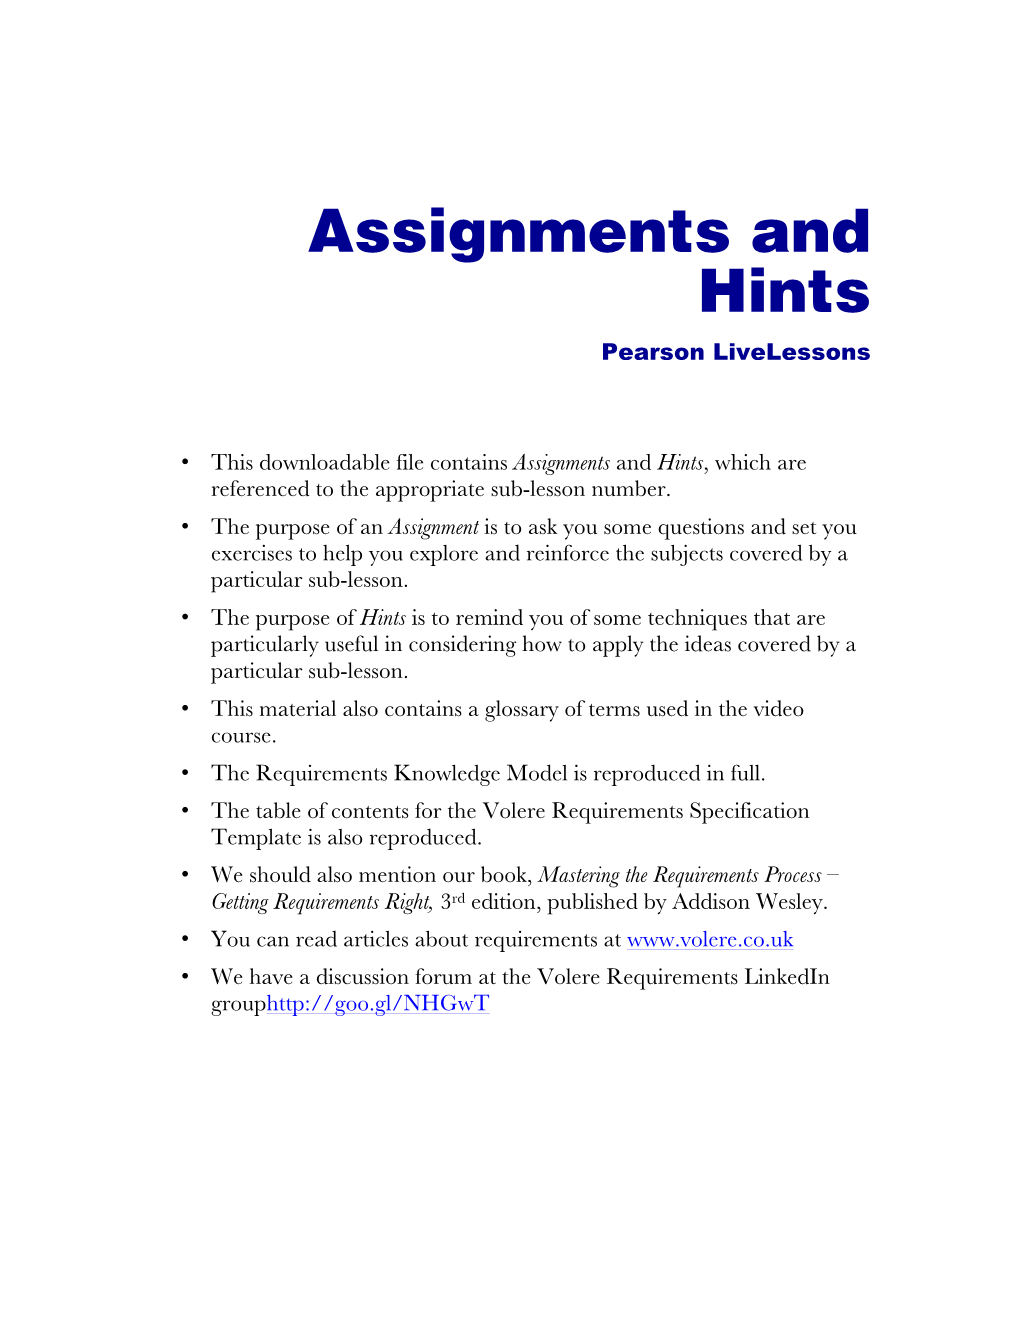 Assignments and Hints Pearson Livelessons